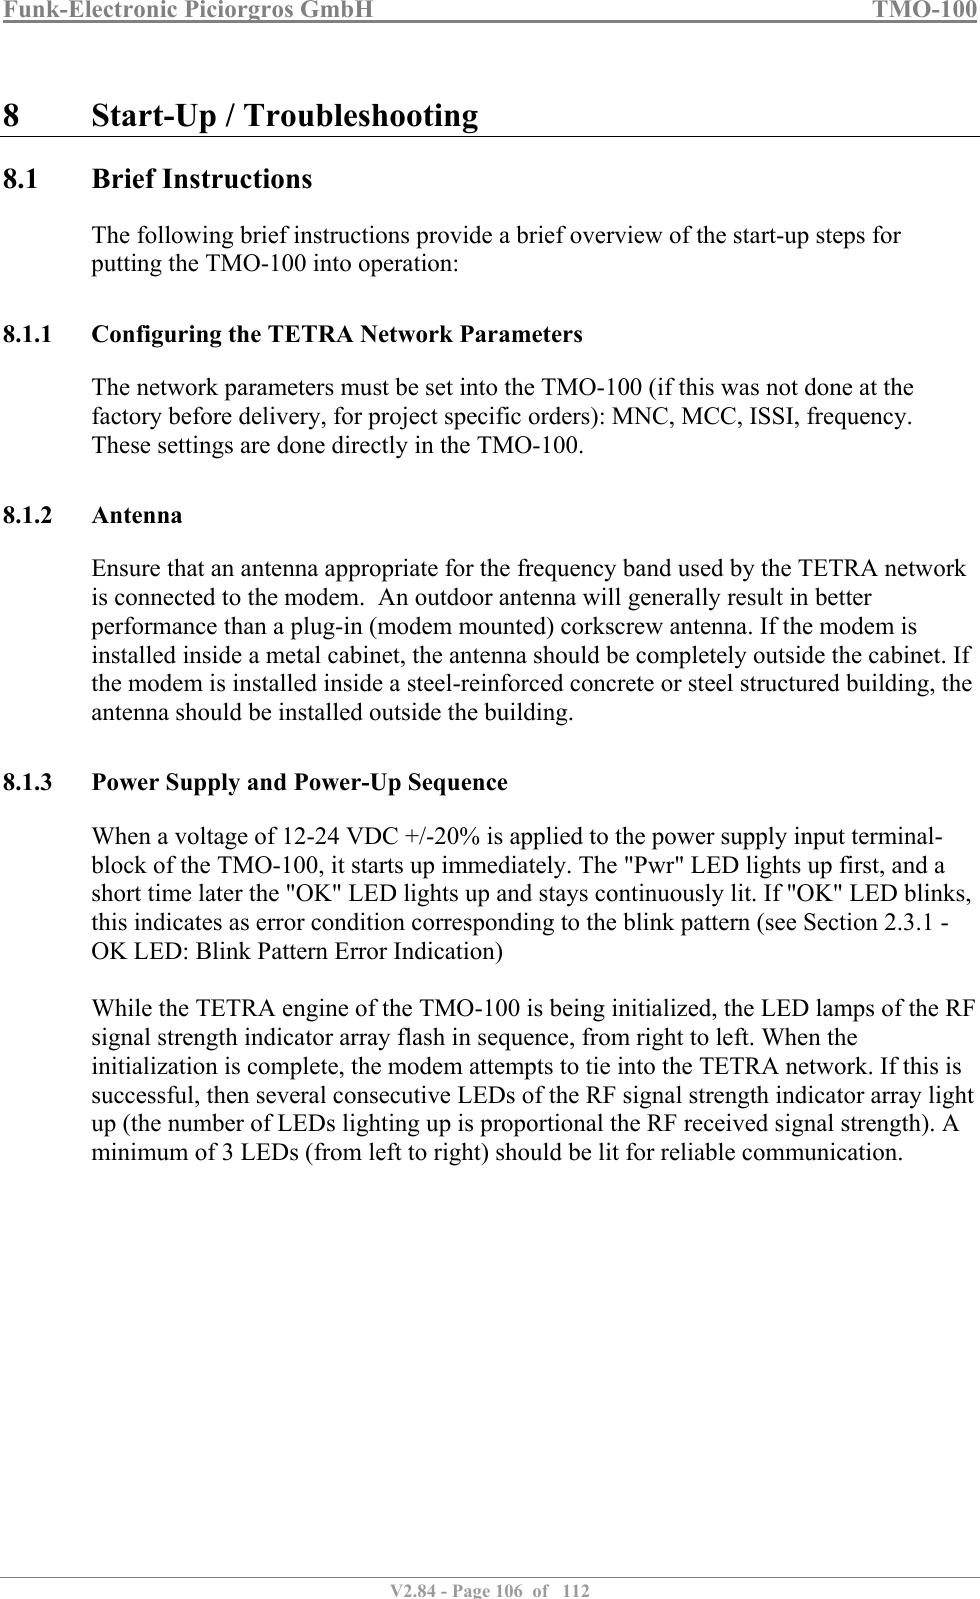 Funk-Electronic Piciorgros GmbH   TMO-100   V2.84 - Page 106  of   112   8 Start-Up / Troubleshooting 8.1 Brief Instructions The following brief instructions provide a brief overview of the start-up steps for putting the TMO-100 into operation:  8.1.1 Configuring the TETRA Network Parameters The network parameters must be set into the TMO-100 (if this was not done at the factory before delivery, for project specific orders): MNC, MCC, ISSI, frequency. These settings are done directly in the TMO-100.  8.1.2 Antenna Ensure that an antenna appropriate for the frequency band used by the TETRA network is connected to the modem.  An outdoor antenna will generally result in better performance than a plug-in (modem mounted) corkscrew antenna. If the modem is installed inside a metal cabinet, the antenna should be completely outside the cabinet. If the modem is installed inside a steel-reinforced concrete or steel structured building, the antenna should be installed outside the building.  8.1.3 Power Supply and Power-Up Sequence When a voltage of 12-24 VDC +/-20% is applied to the power supply input terminal-block of the TMO-100, it starts up immediately. The &quot;Pwr&quot; LED lights up first, and a short time later the &quot;OK&quot; LED lights up and stays continuously lit. If &quot;OK&quot; LED blinks, this indicates as error condition corresponding to the blink pattern (see Section 2.3.1 - OK LED: Blink Pattern Error Indication)  While the TETRA engine of the TMO-100 is being initialized, the LED lamps of the RF signal strength indicator array flash in sequence, from right to left. When the initialization is complete, the modem attempts to tie into the TETRA network. If this is successful, then several consecutive LEDs of the RF signal strength indicator array light up (the number of LEDs lighting up is proportional the RF received signal strength). A minimum of 3 LEDs (from left to right) should be lit for reliable communication.  